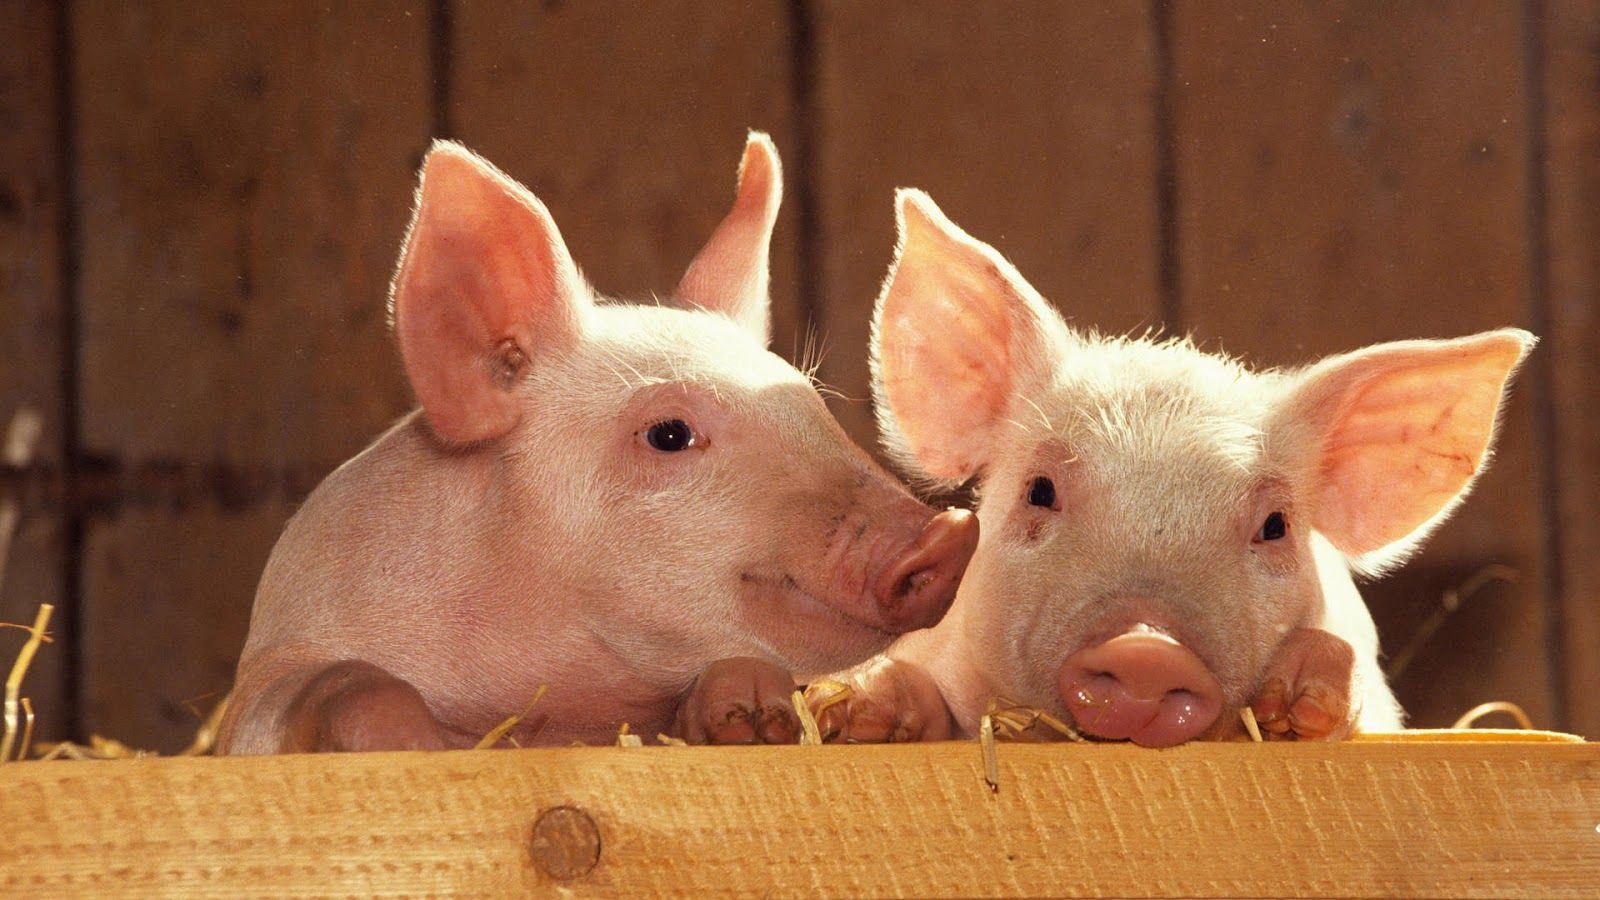 Baby Pigs HD Wallpaper, Background Image